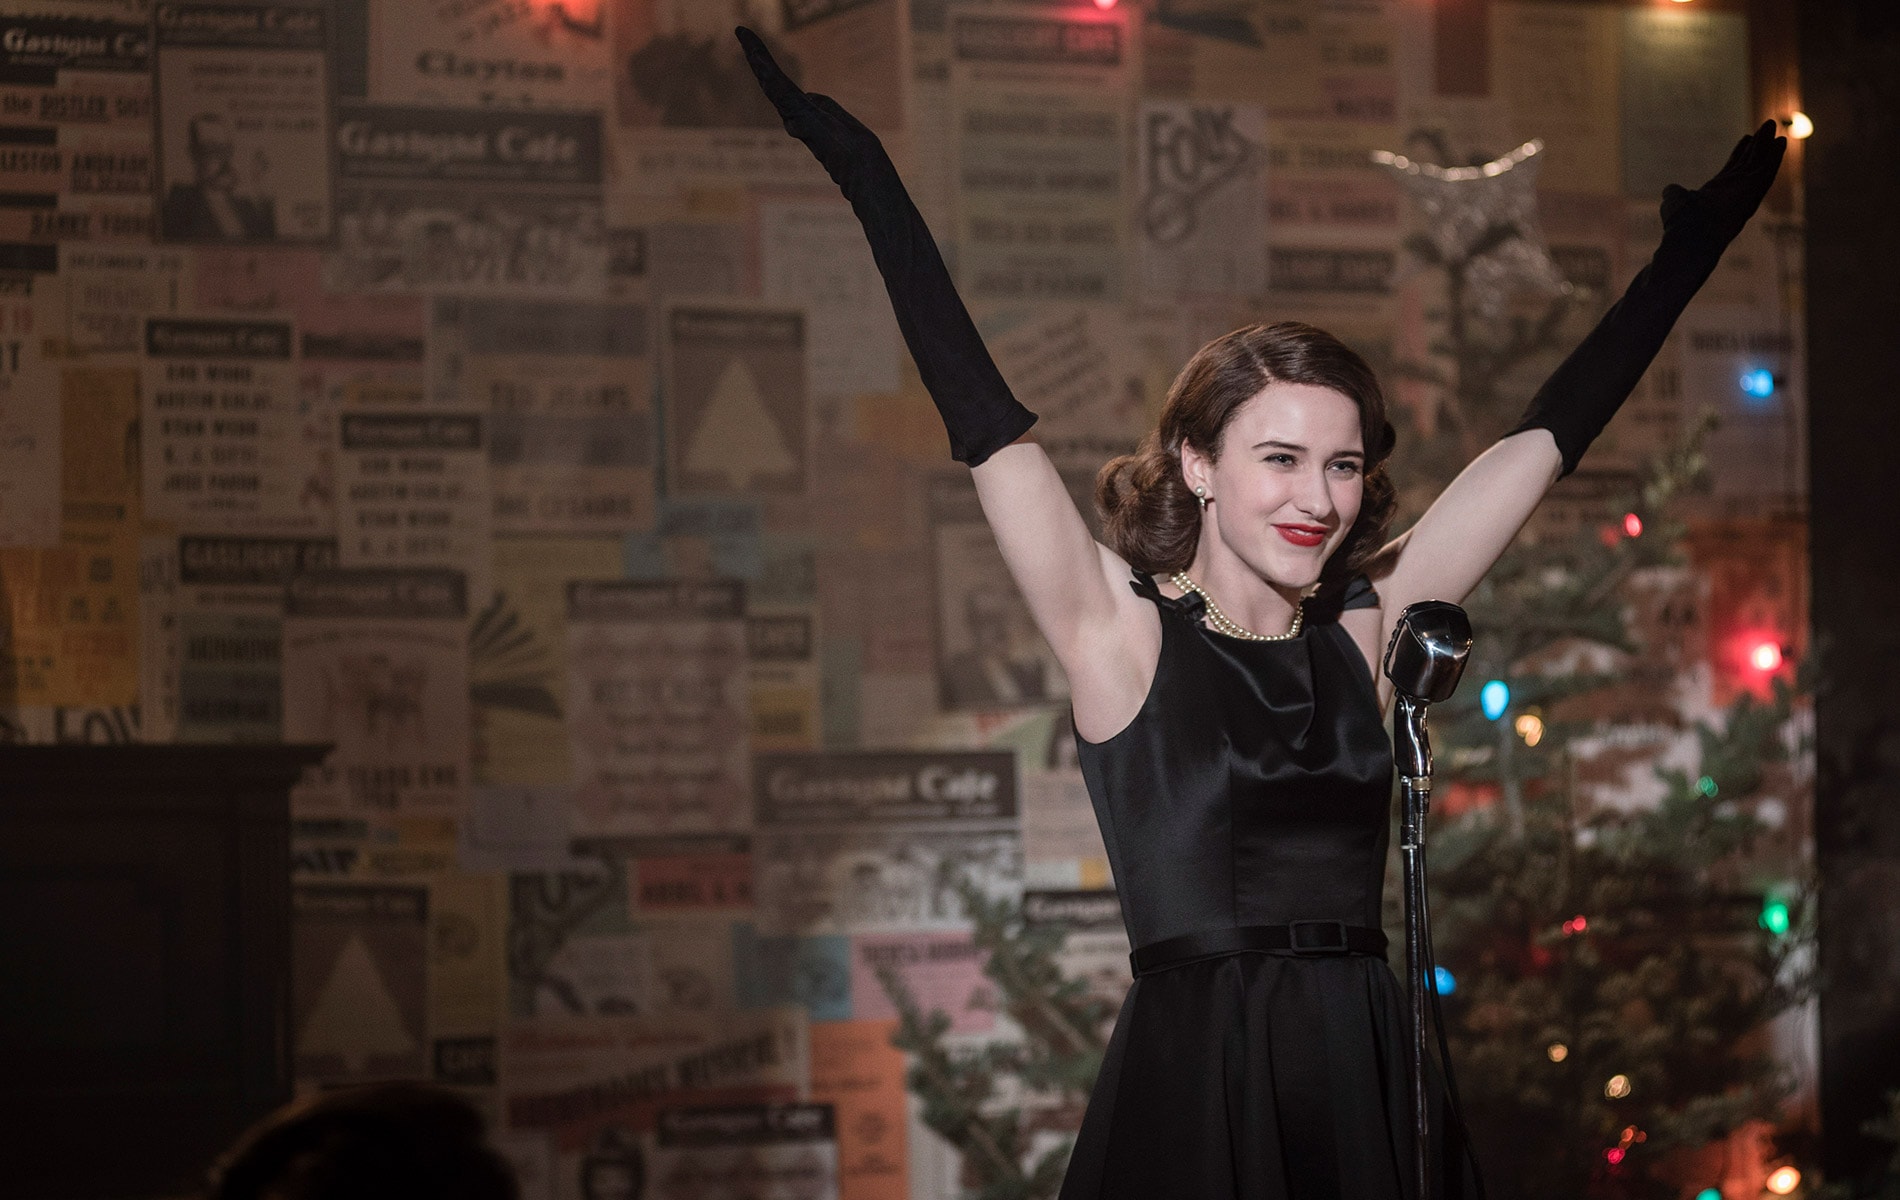 Preparing for the Second Season of “The Marvelous Mrs. Maisel”